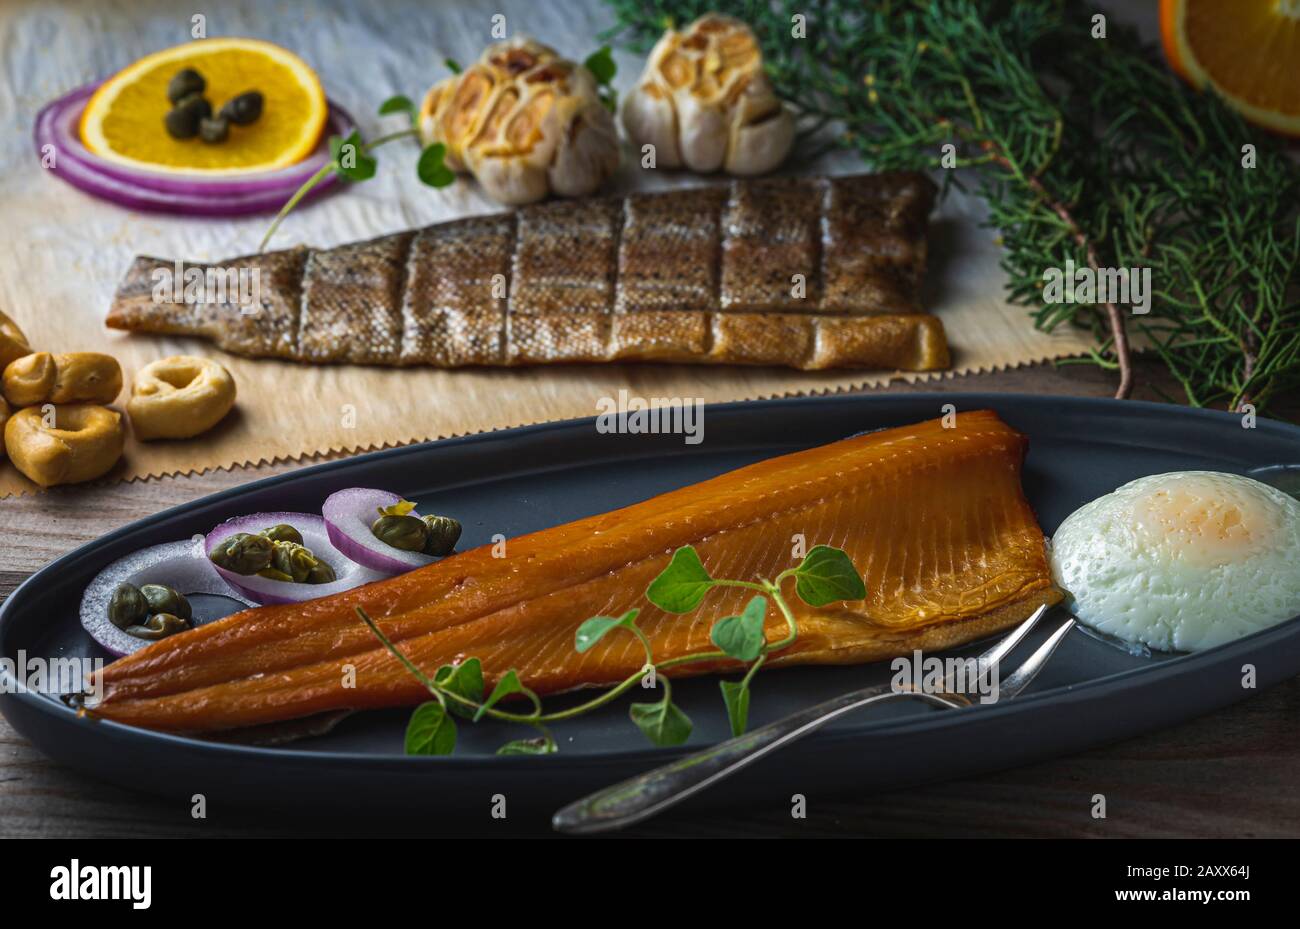 Smoked Trout fillet. Stock Photo